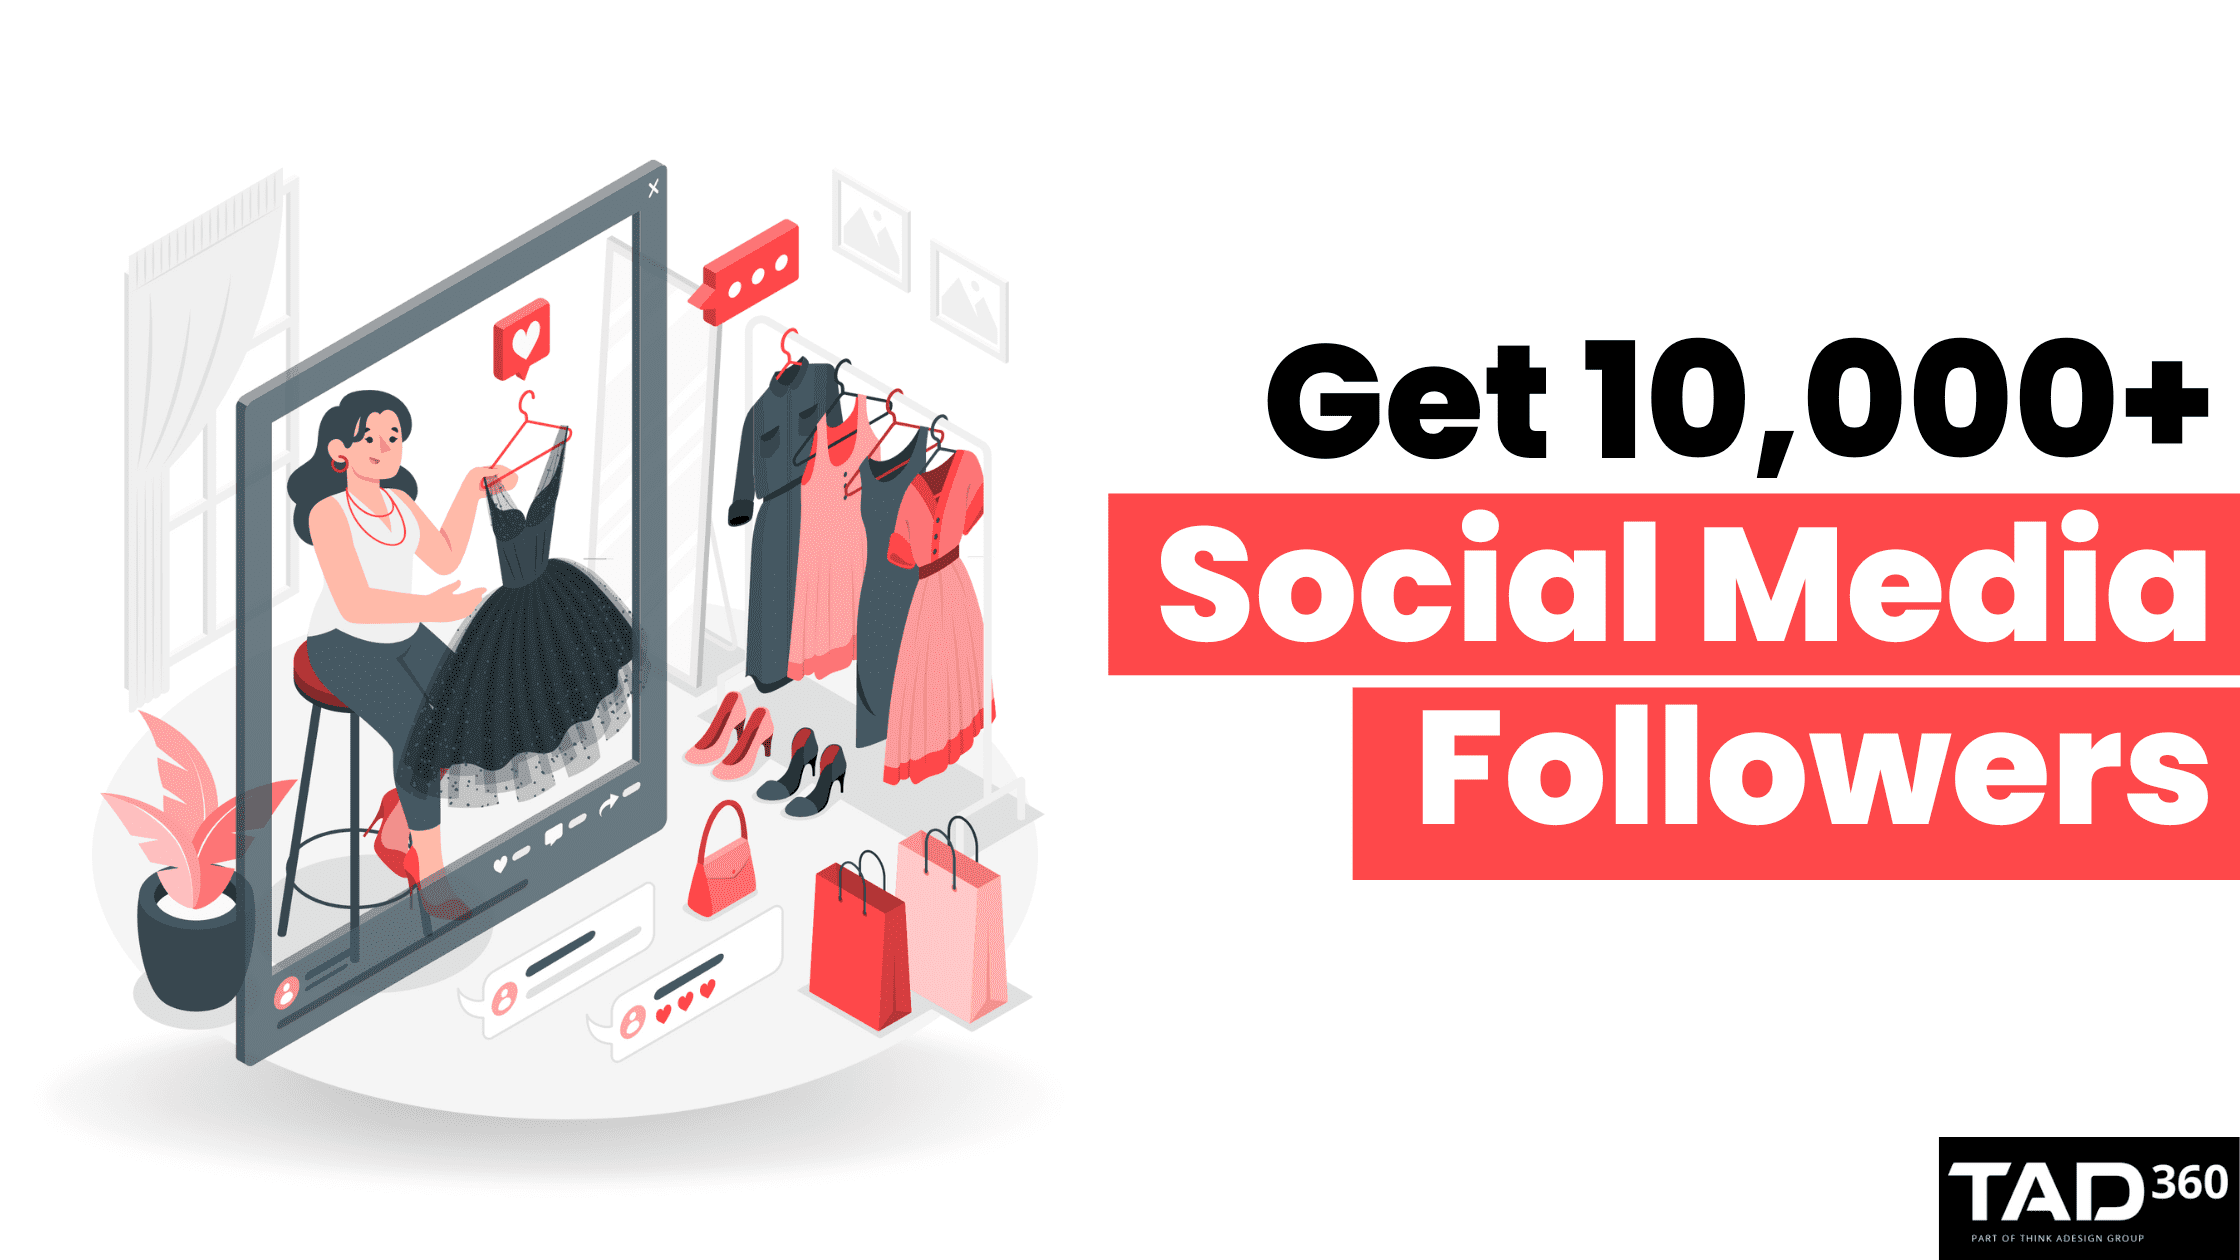 10 Free Tools That’ll Help You Get Your First 10,000 Social Media Followers